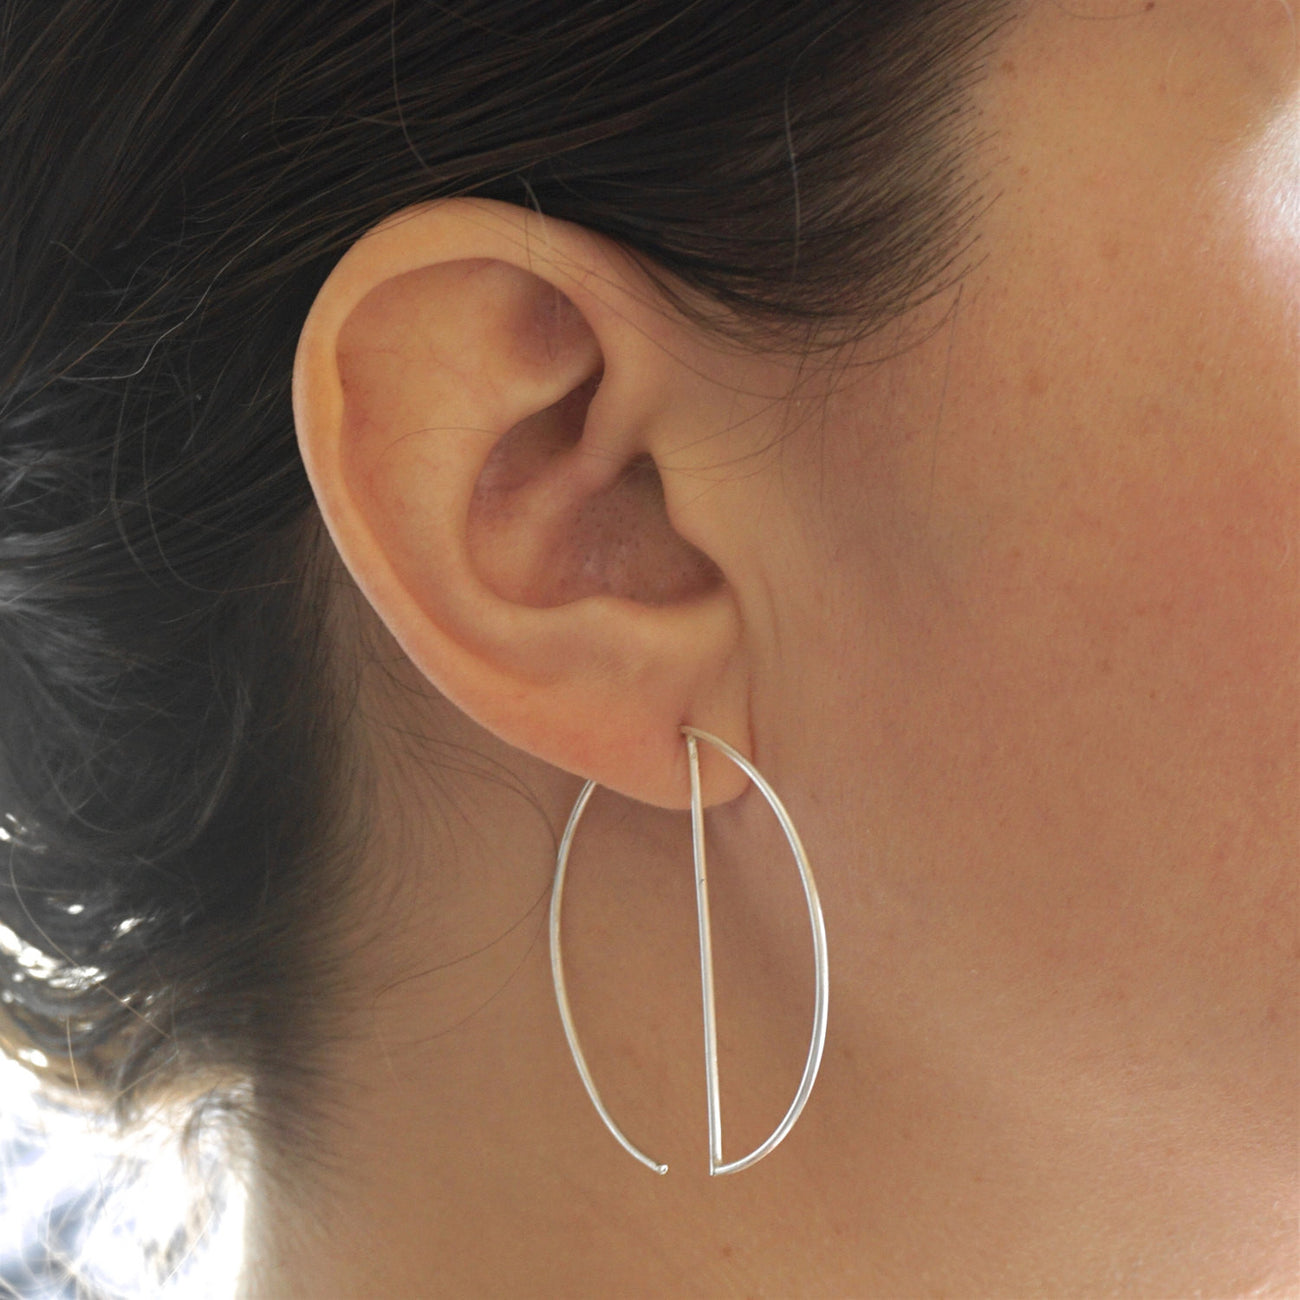 Contemporary Designed - Minimalist and Hand-Made, Open Hoop Dangle Earrings - 0259 - Virginia Wynne Designs